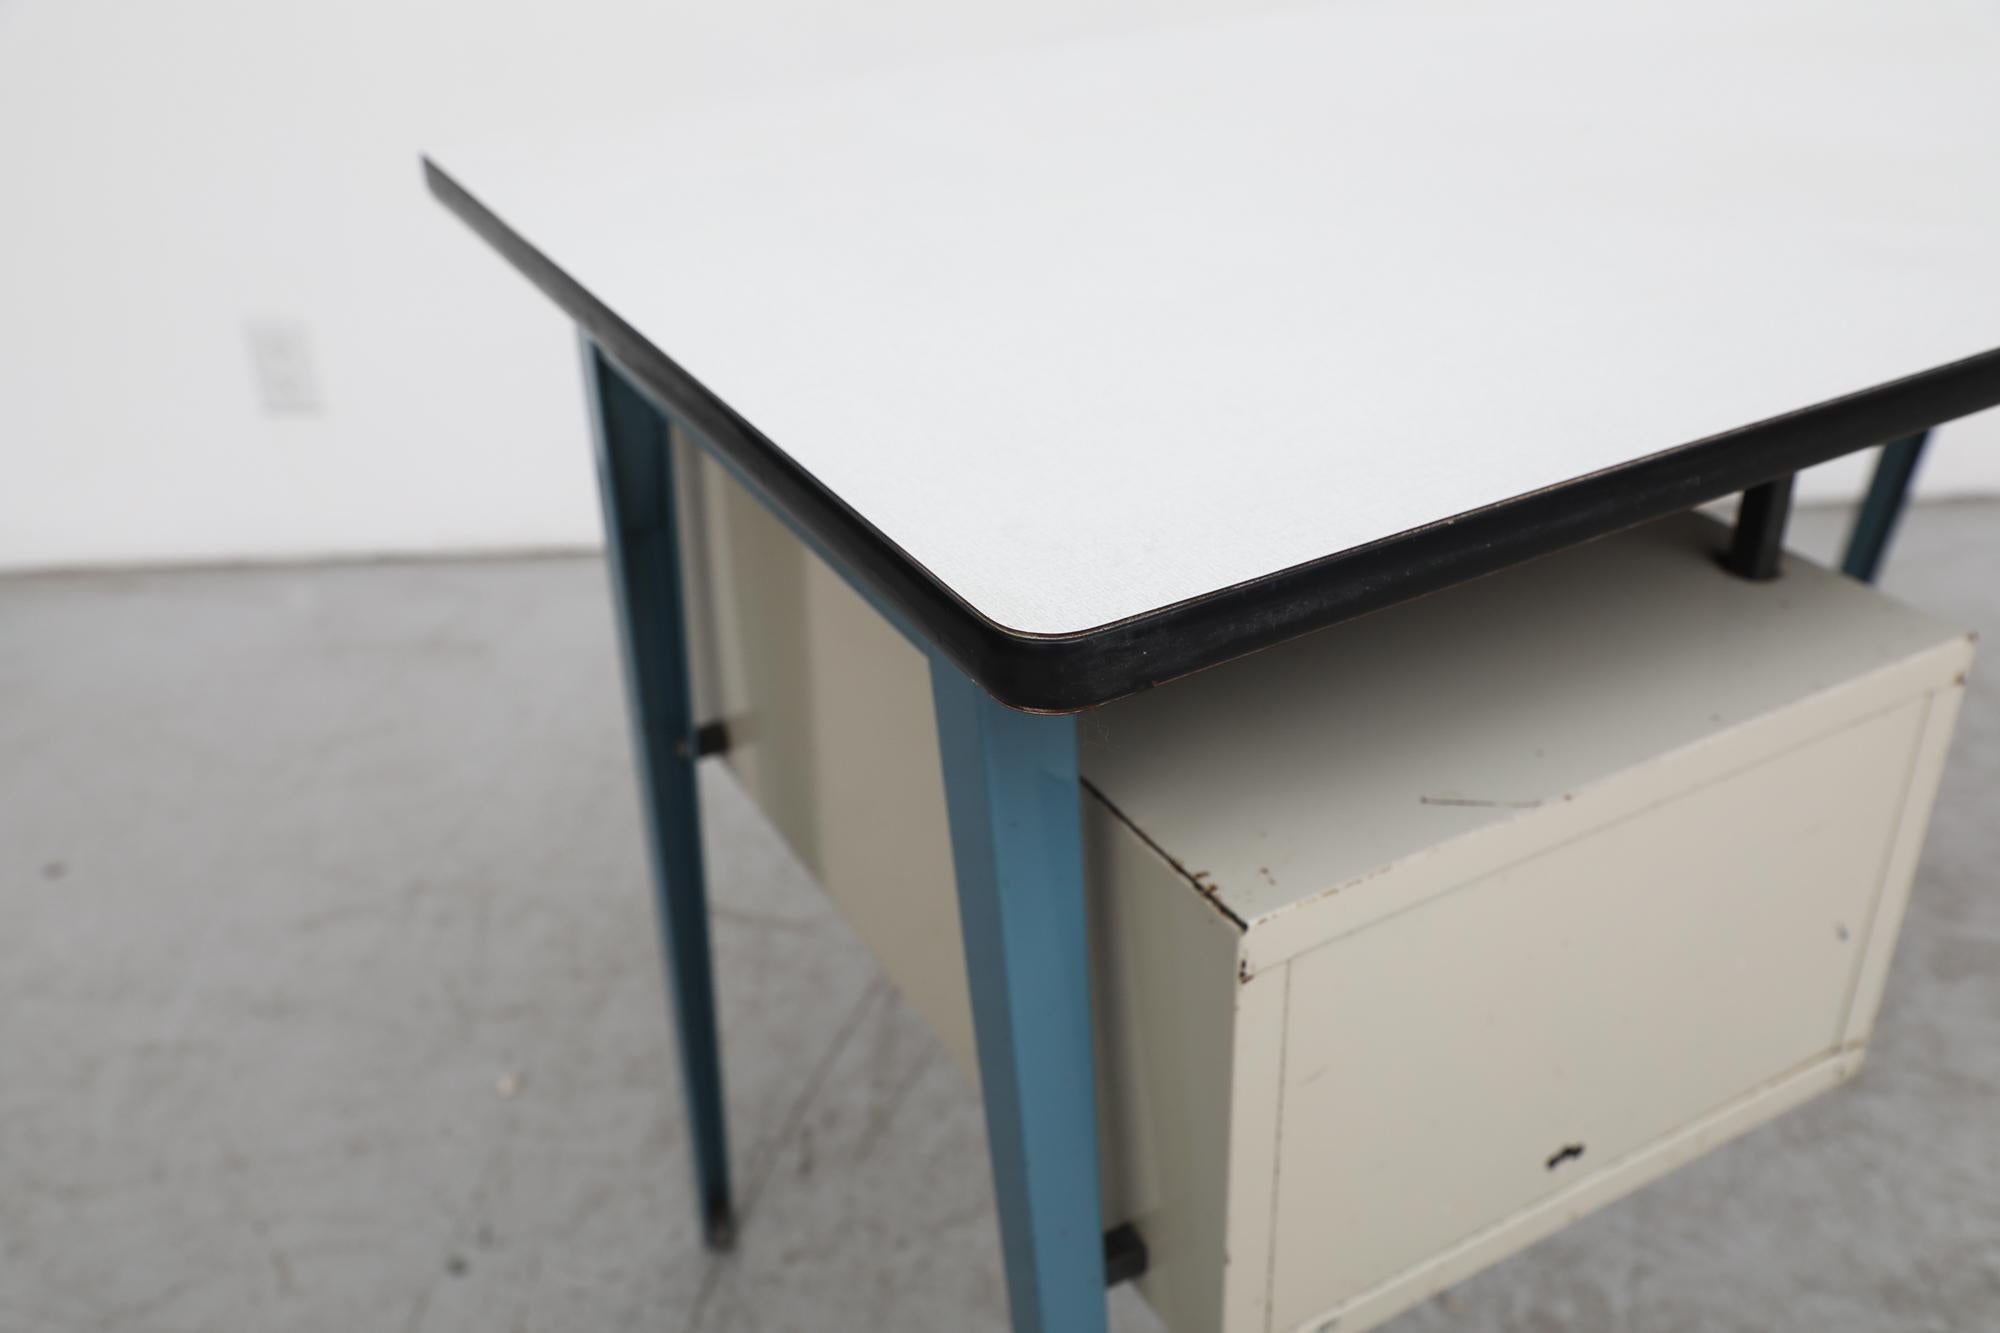 Metal Prouve Inspired Writing Desk with Compass Legs by Marko